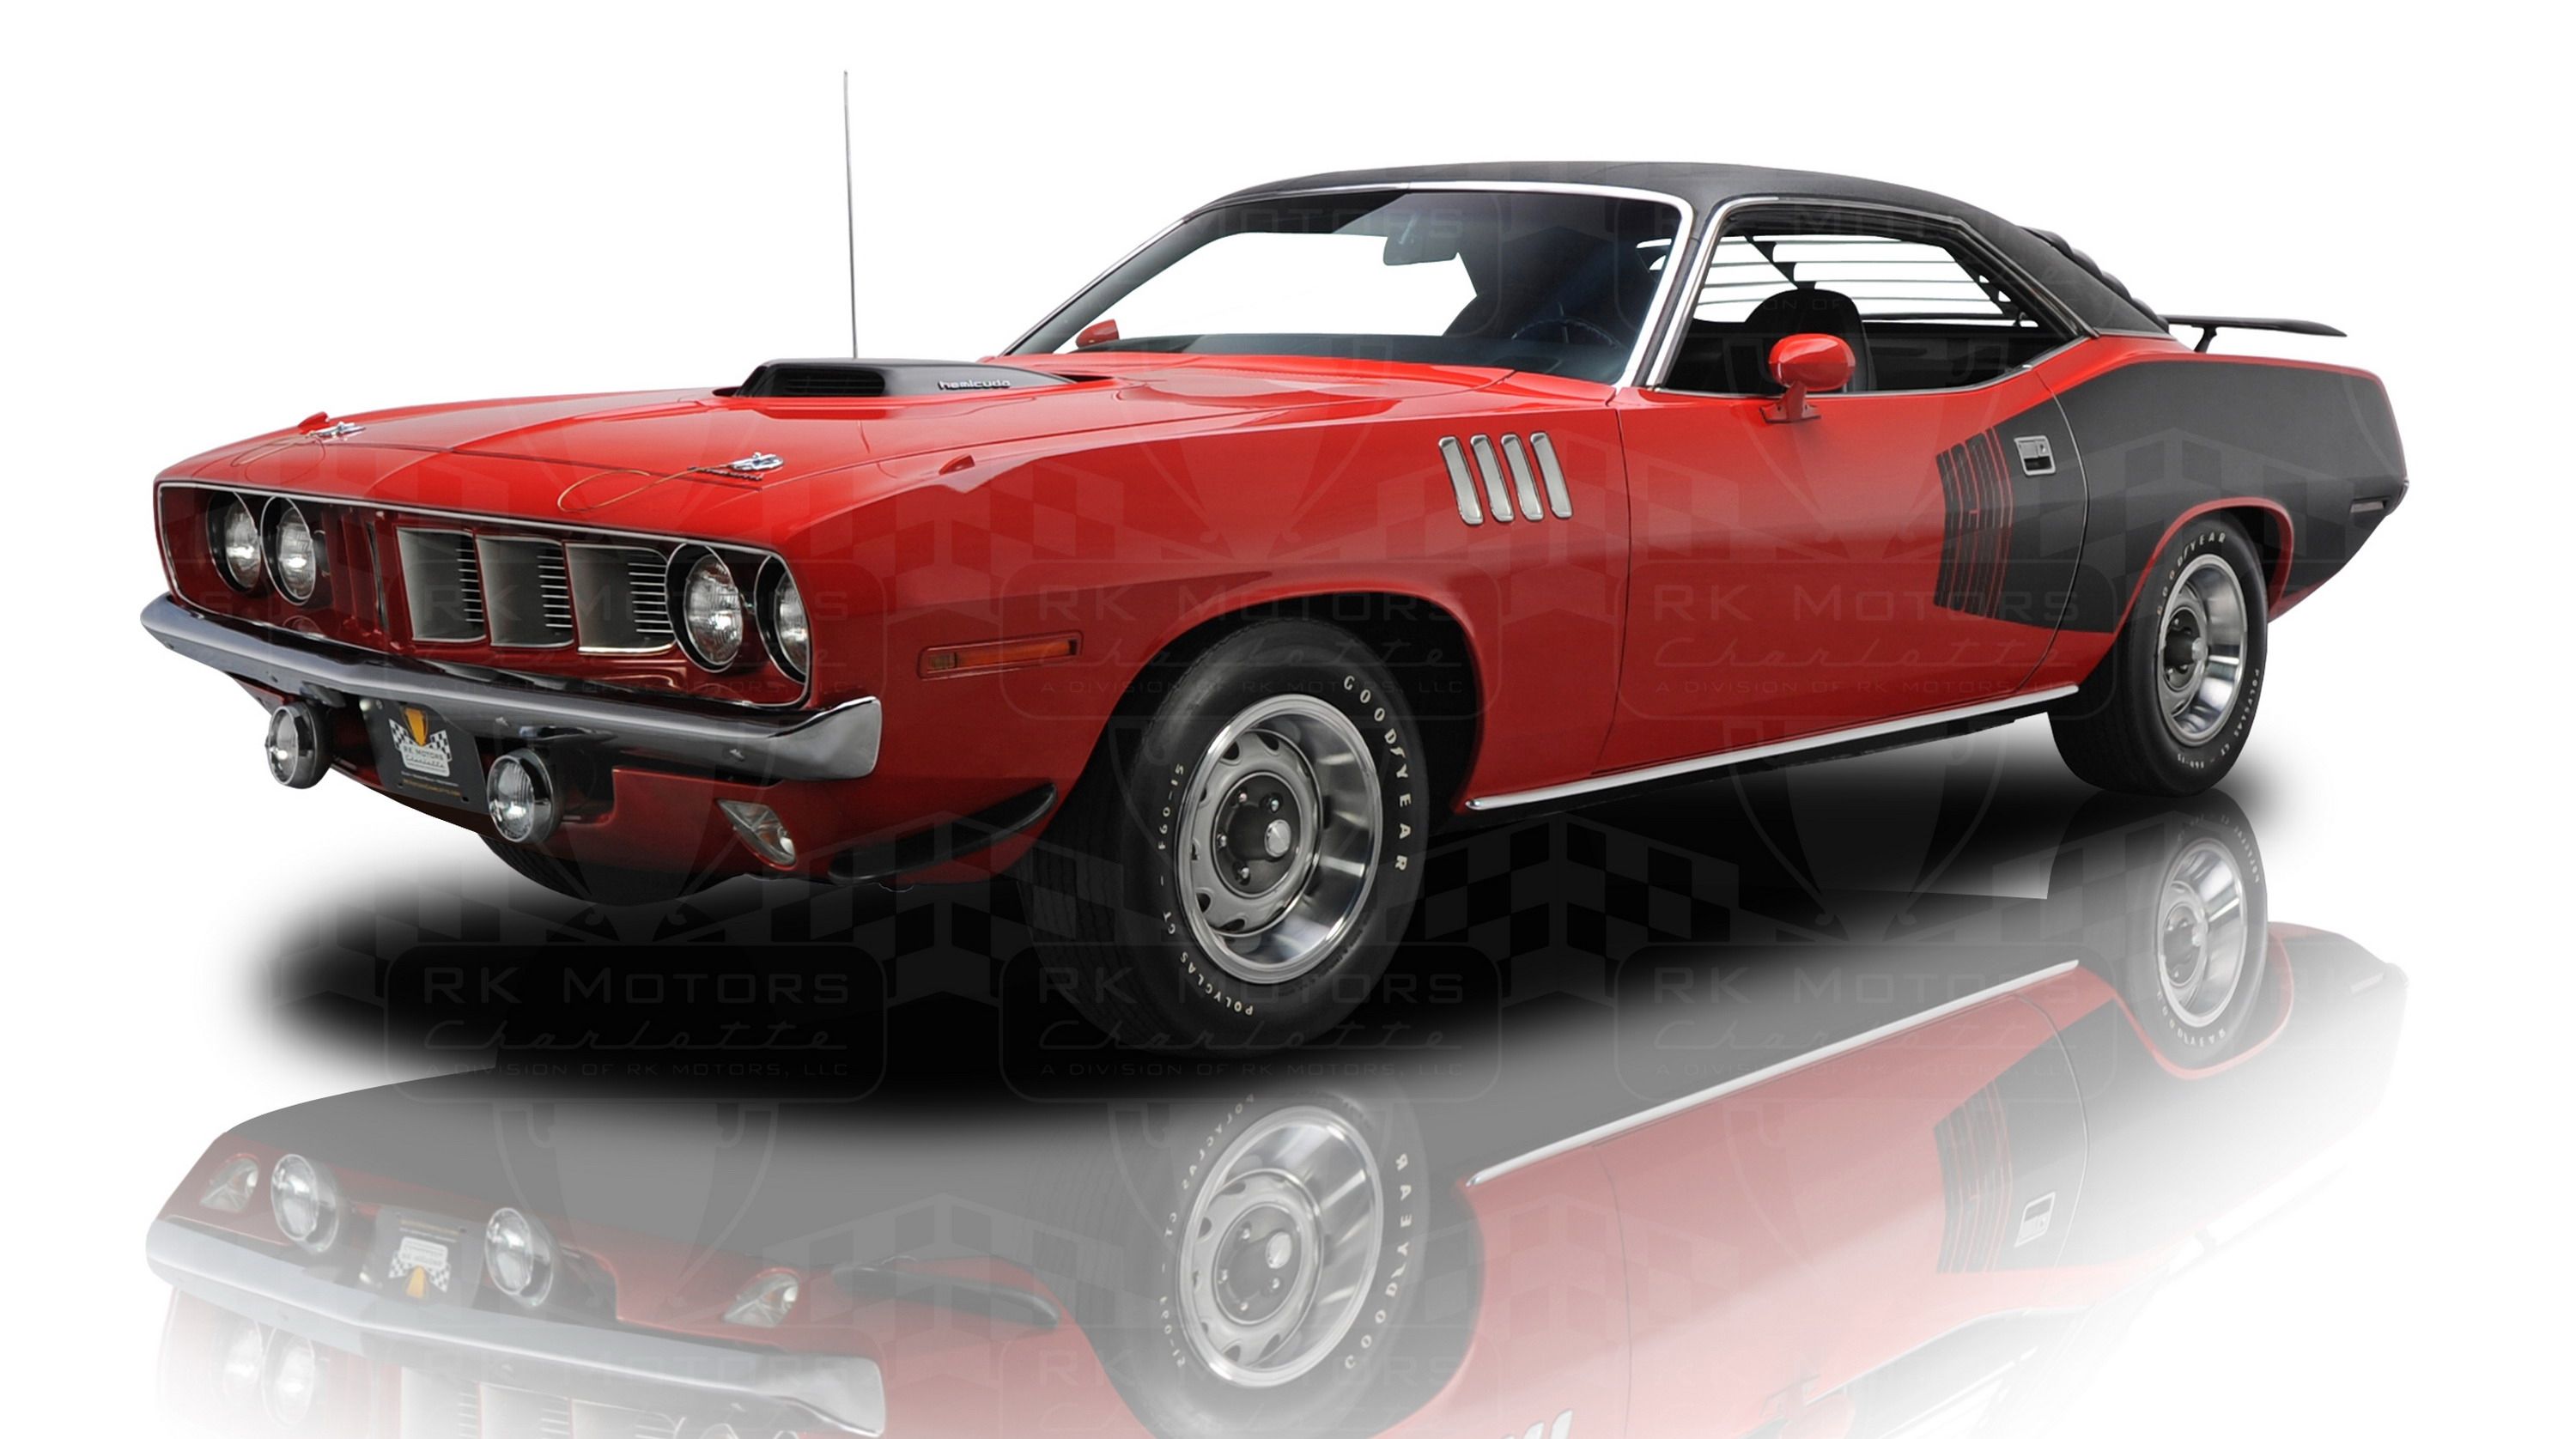  I love me some HEMI Cuda, but is it actually worth more than a LaFerrari?